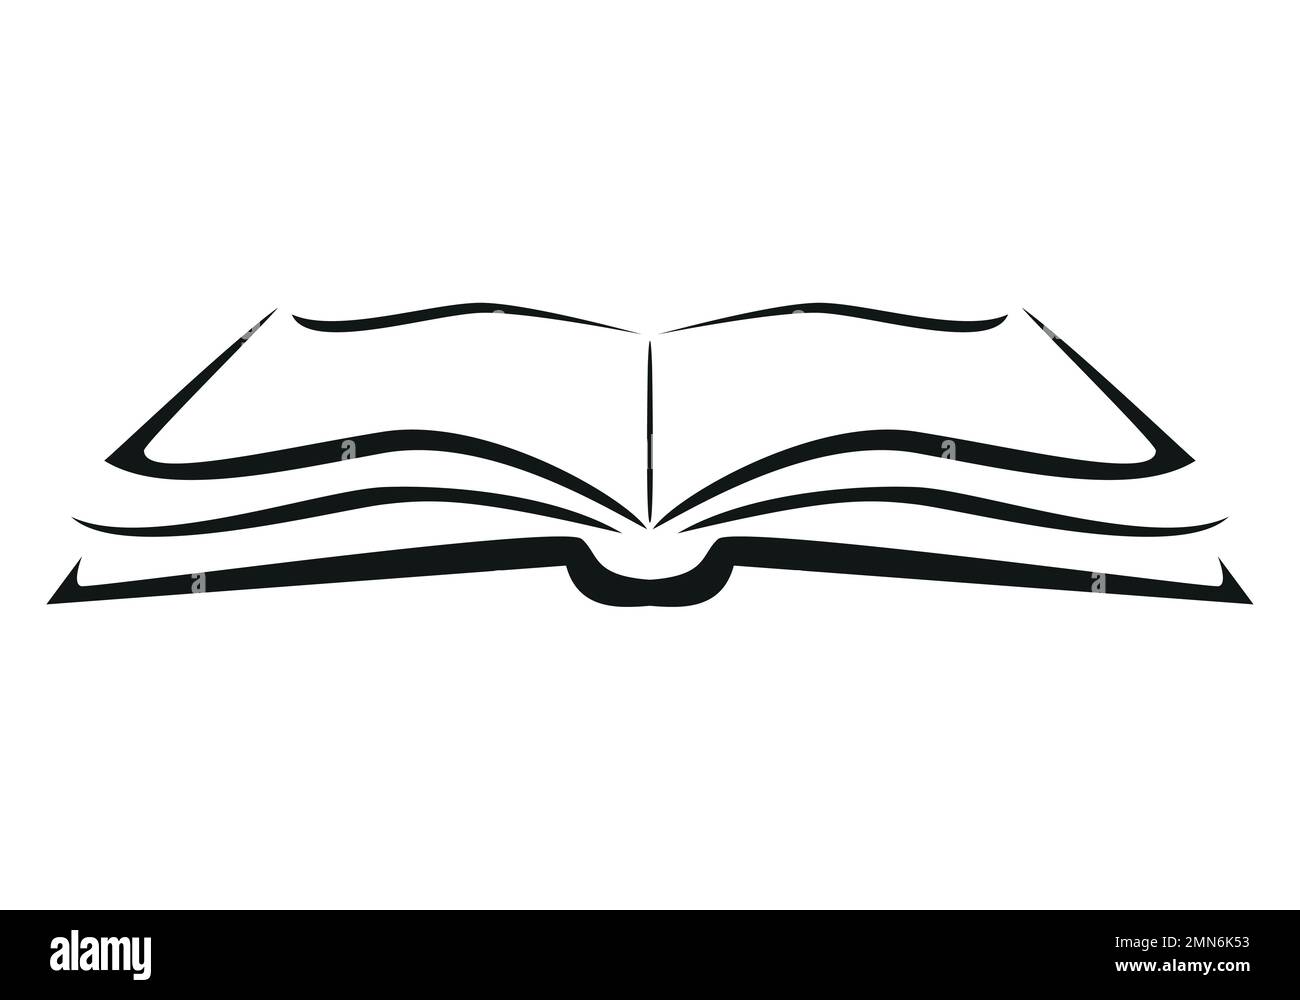 book - black and white vector symbol illustration of an open book, white background Stock Vector